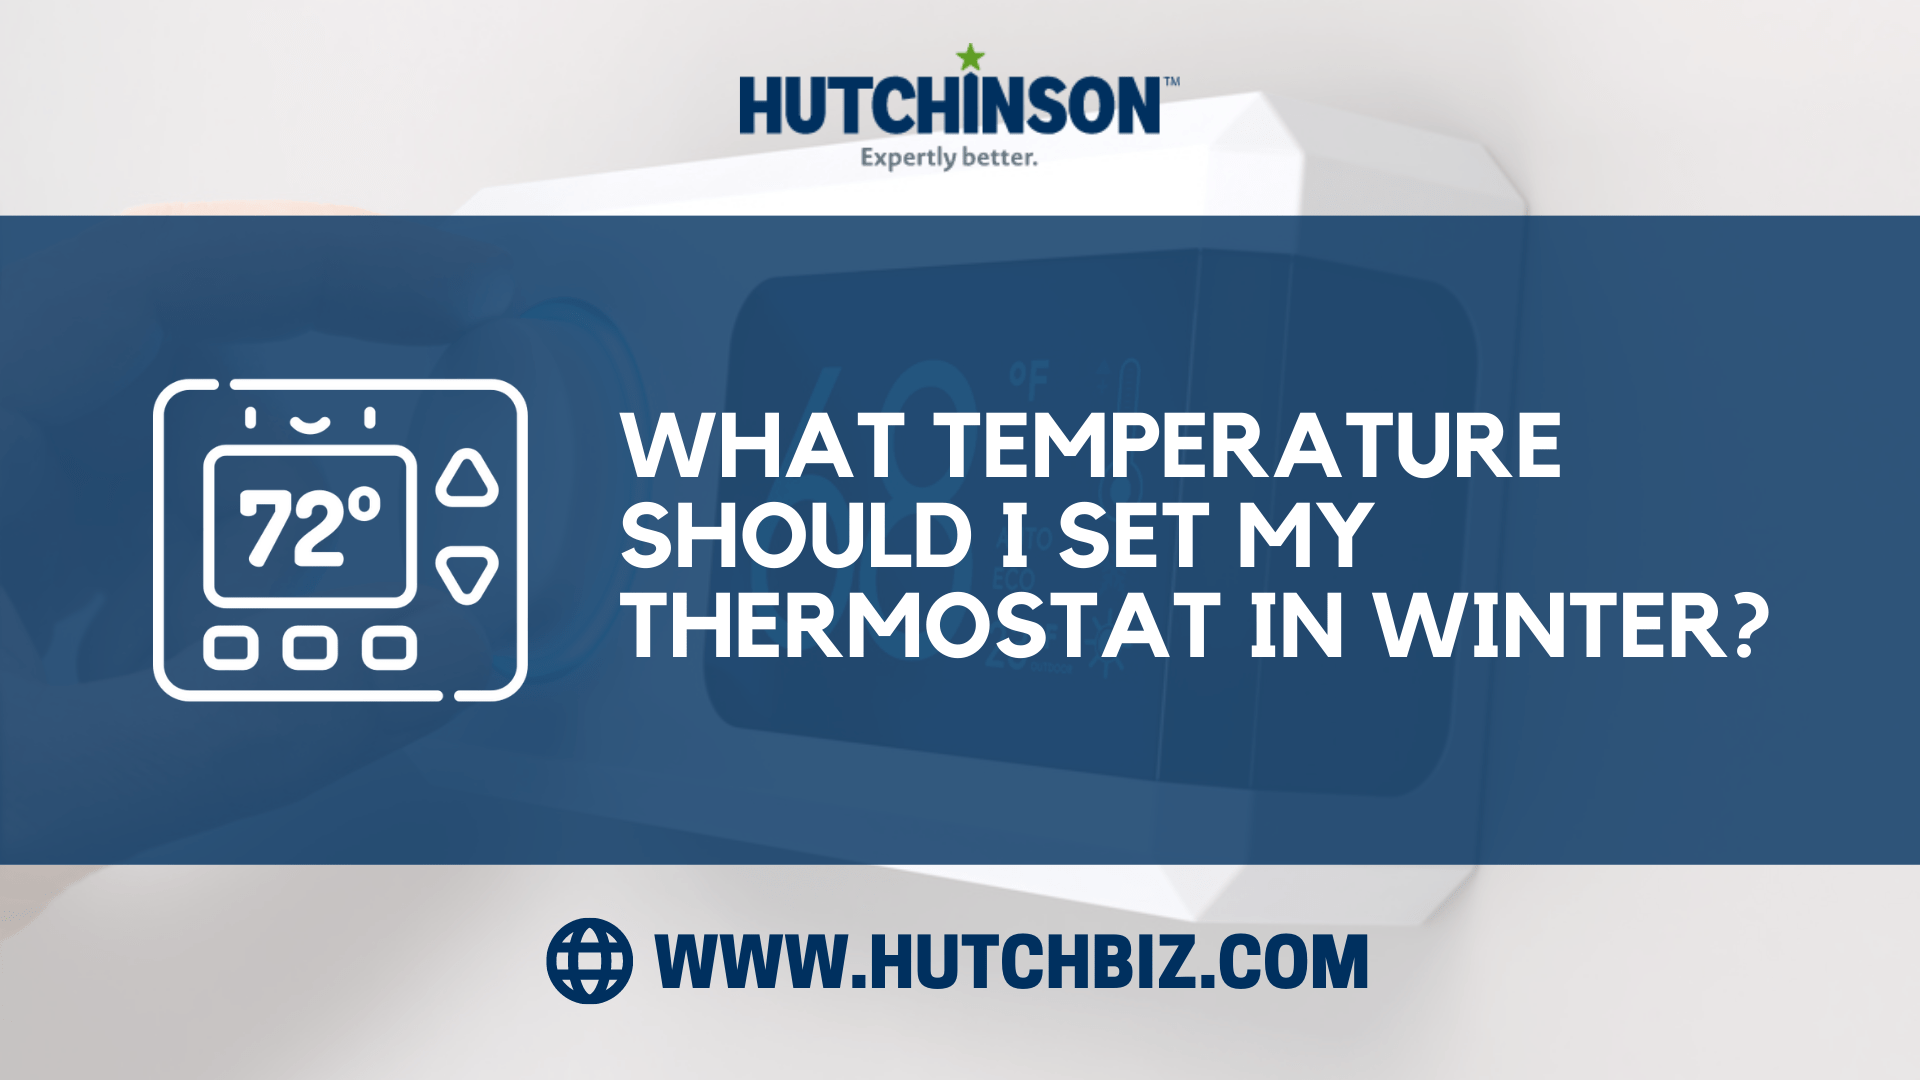 What Temperature Should I Set My Thermostat in Winter?